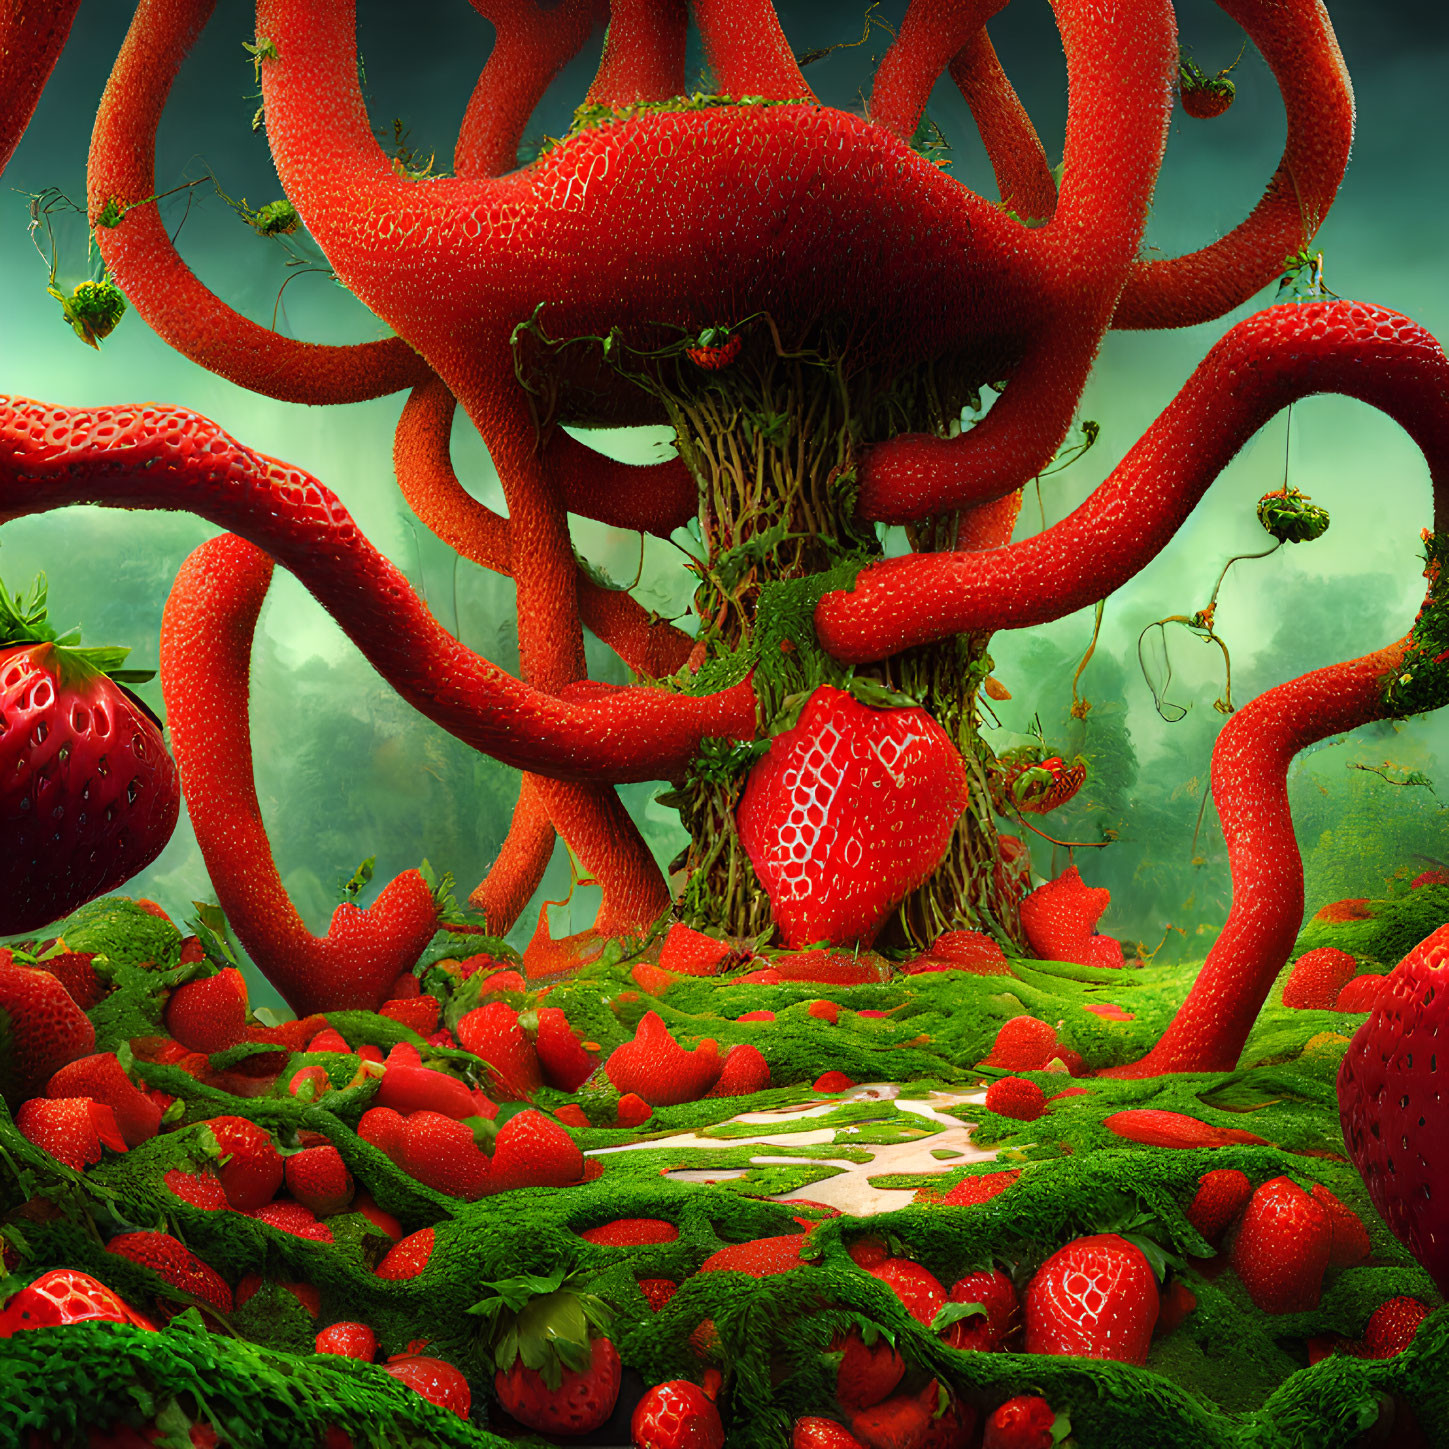 Surreal landscape with giant strawberry-shaped trees and winding path